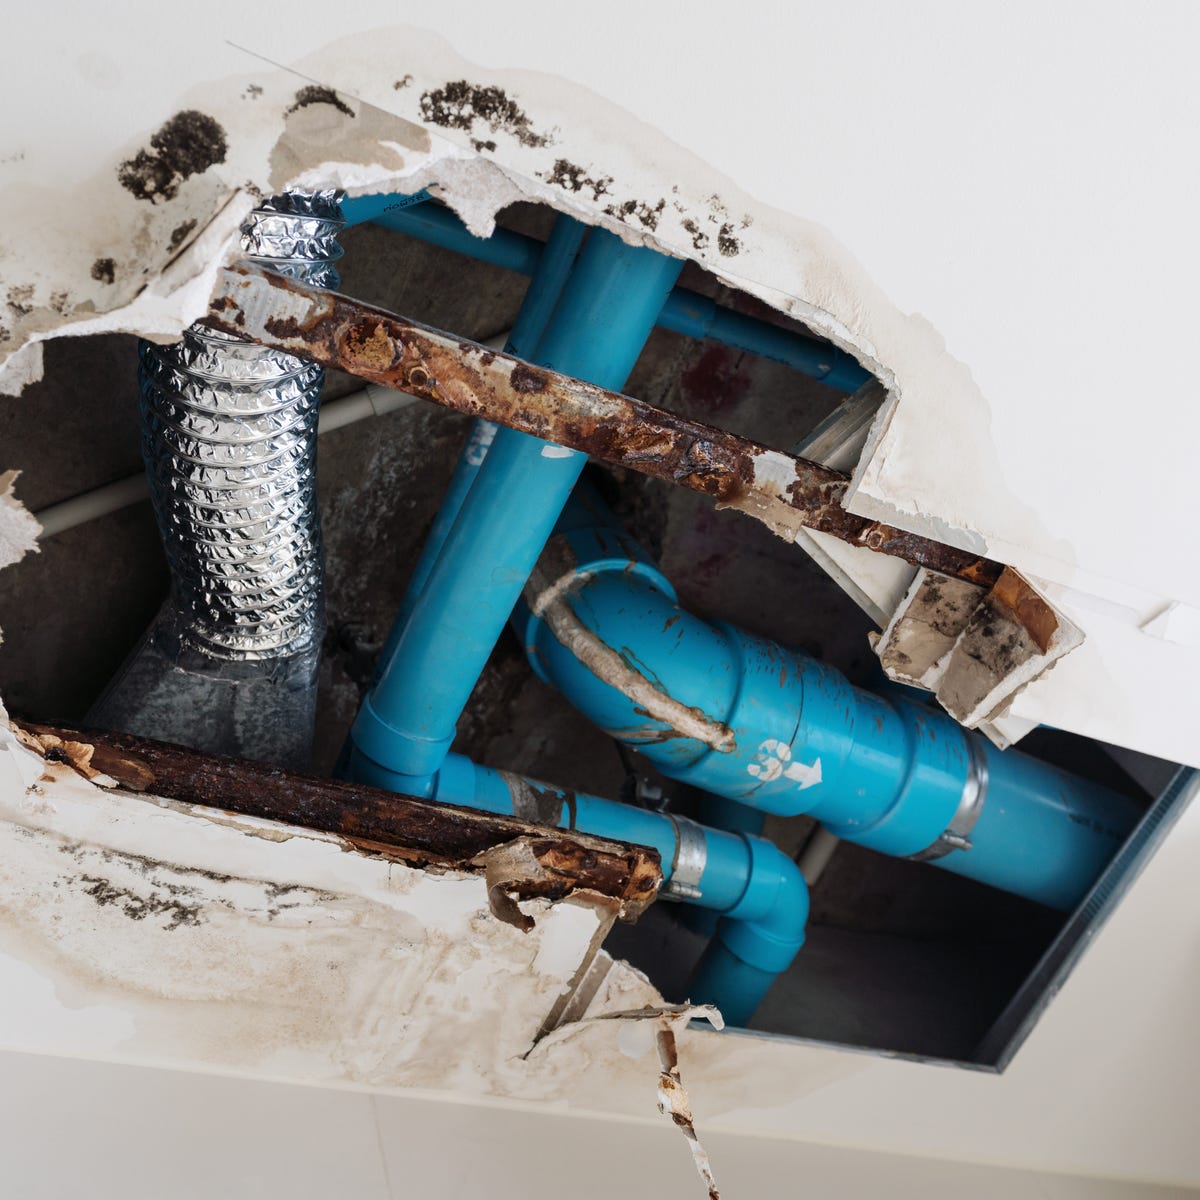 6 Tips to Prevent Frozen Pipes and Costly Repairs This Winter - CNET